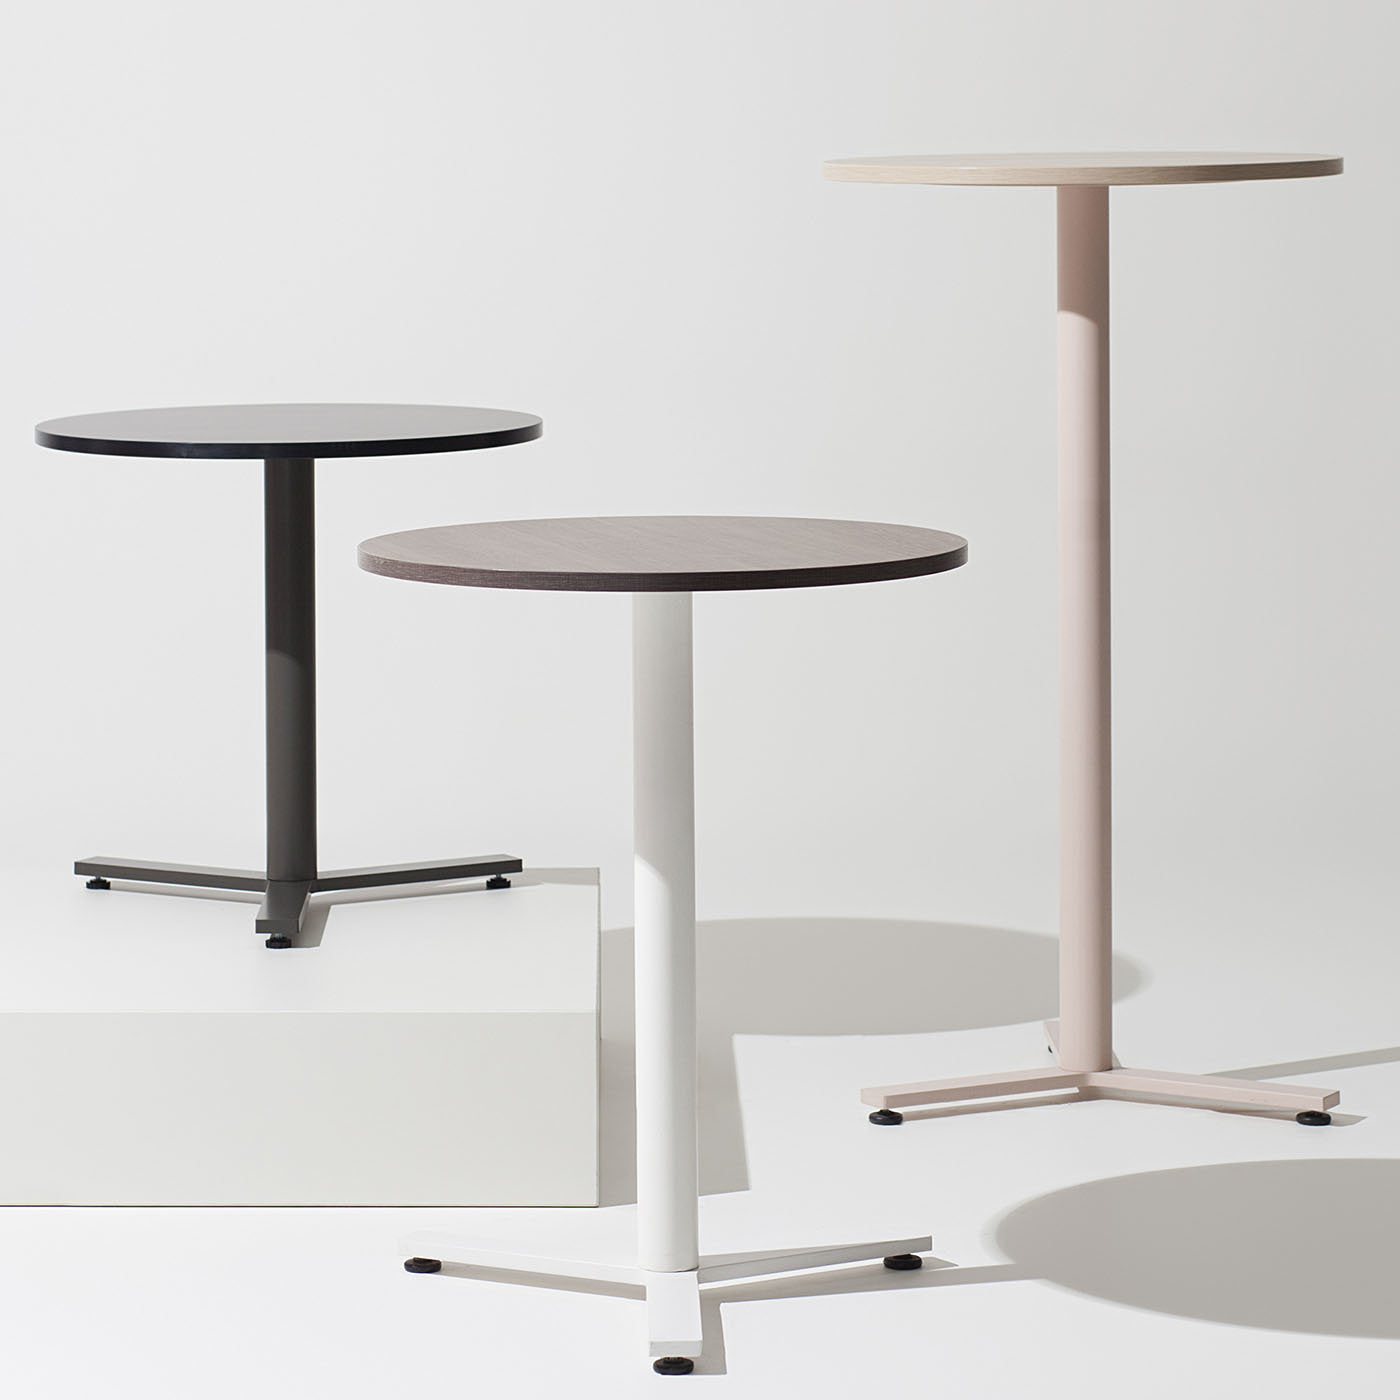 K-Word Large Pink Bistro Table by Giovanni Giacobone + Massimo Roj Progetto CMR - Alternative view 3